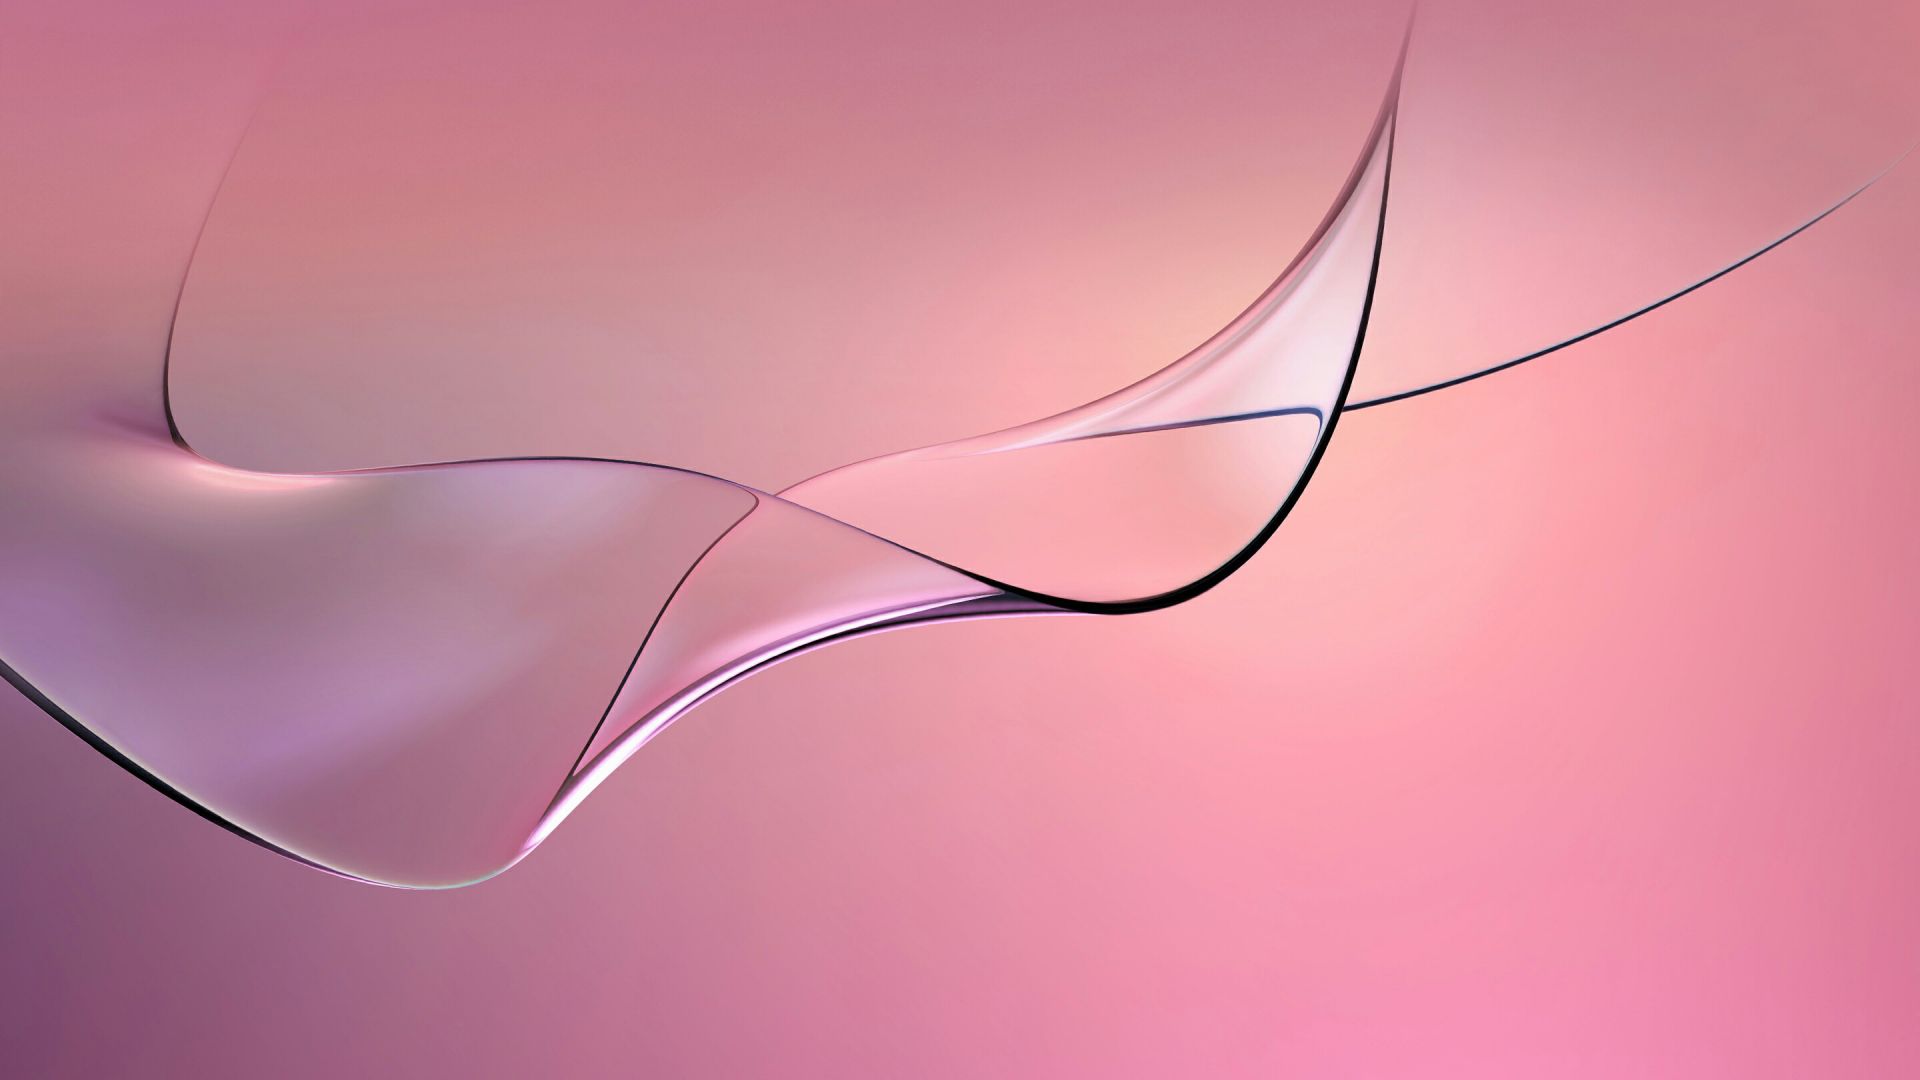 Wallpaper Pink, curves lines, abstract